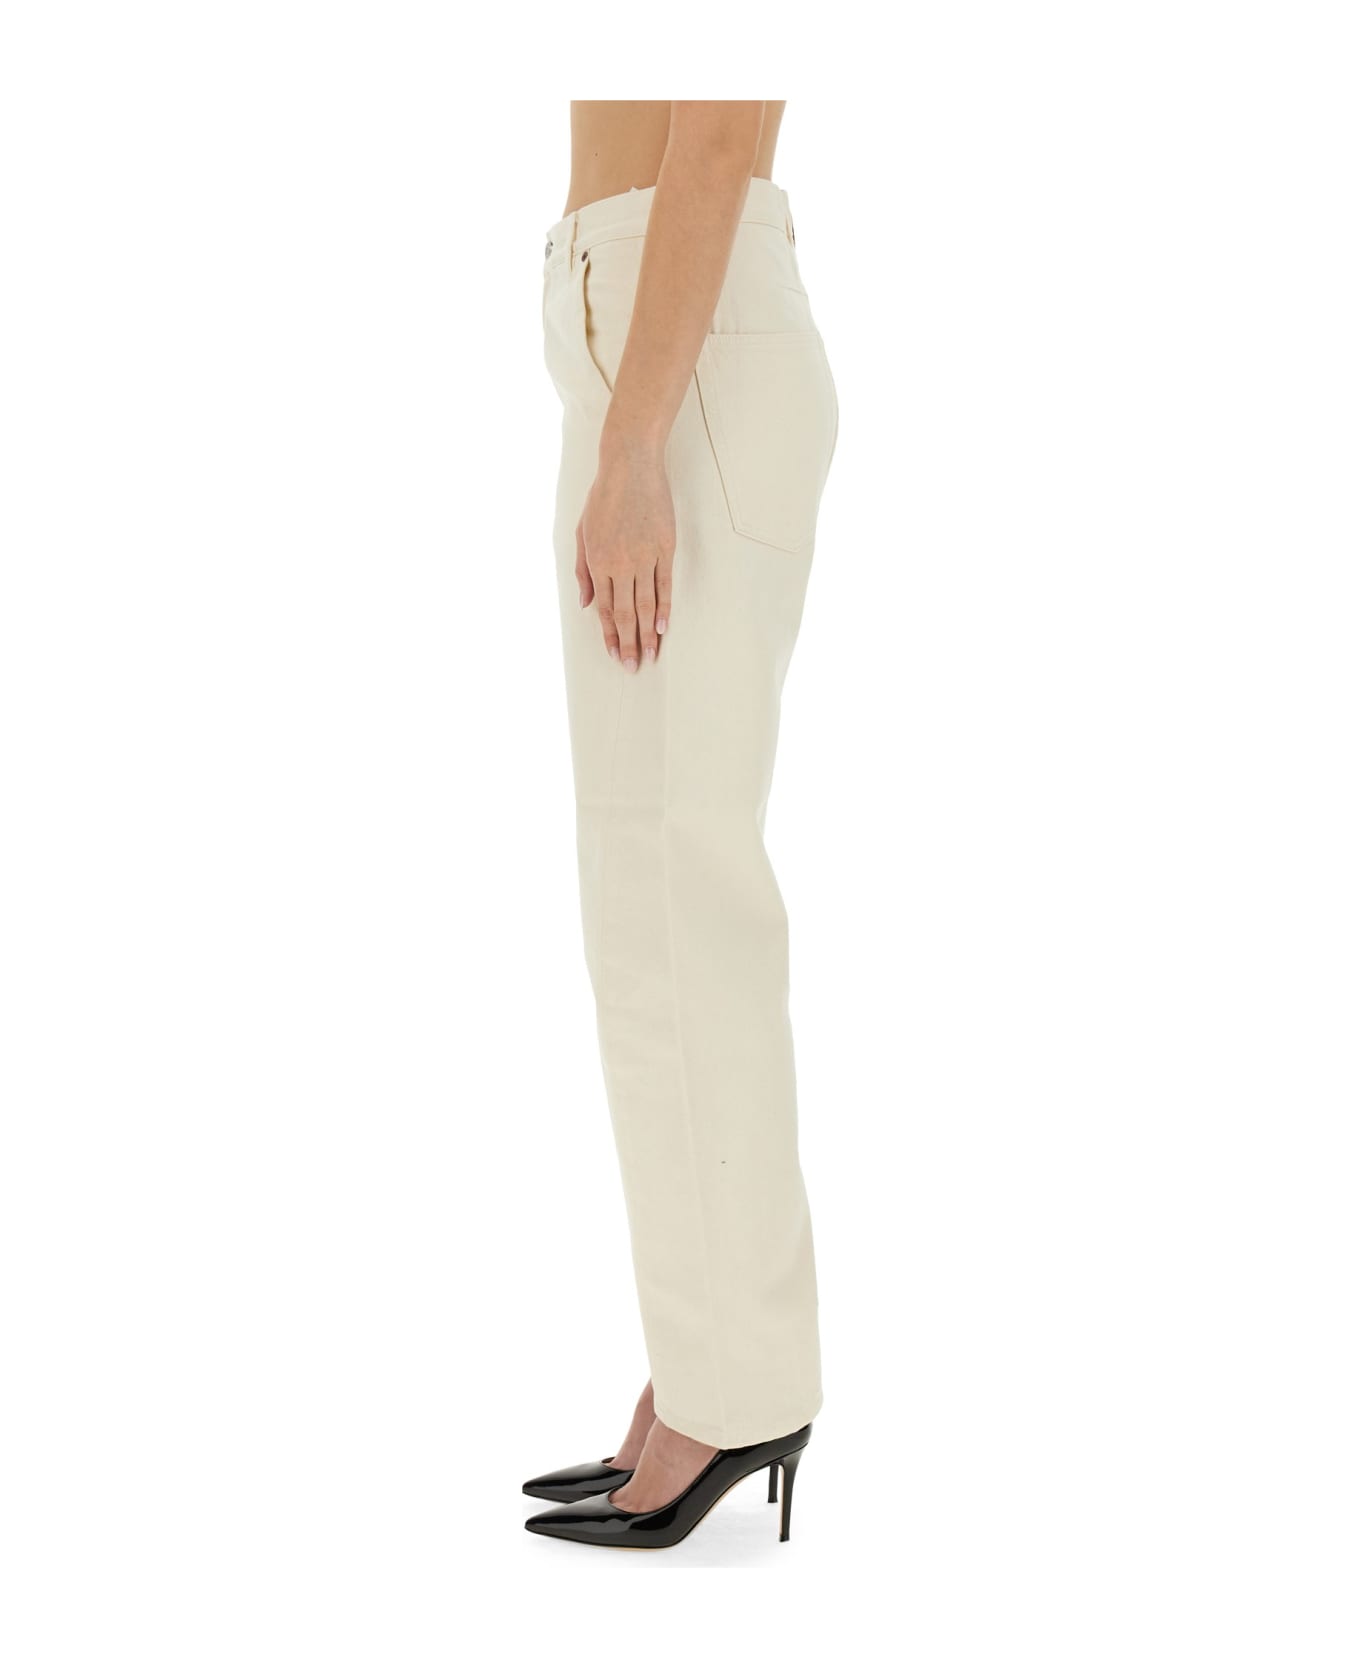 Victoria Beckham Relaxed Fit Jeans - CIPRIA